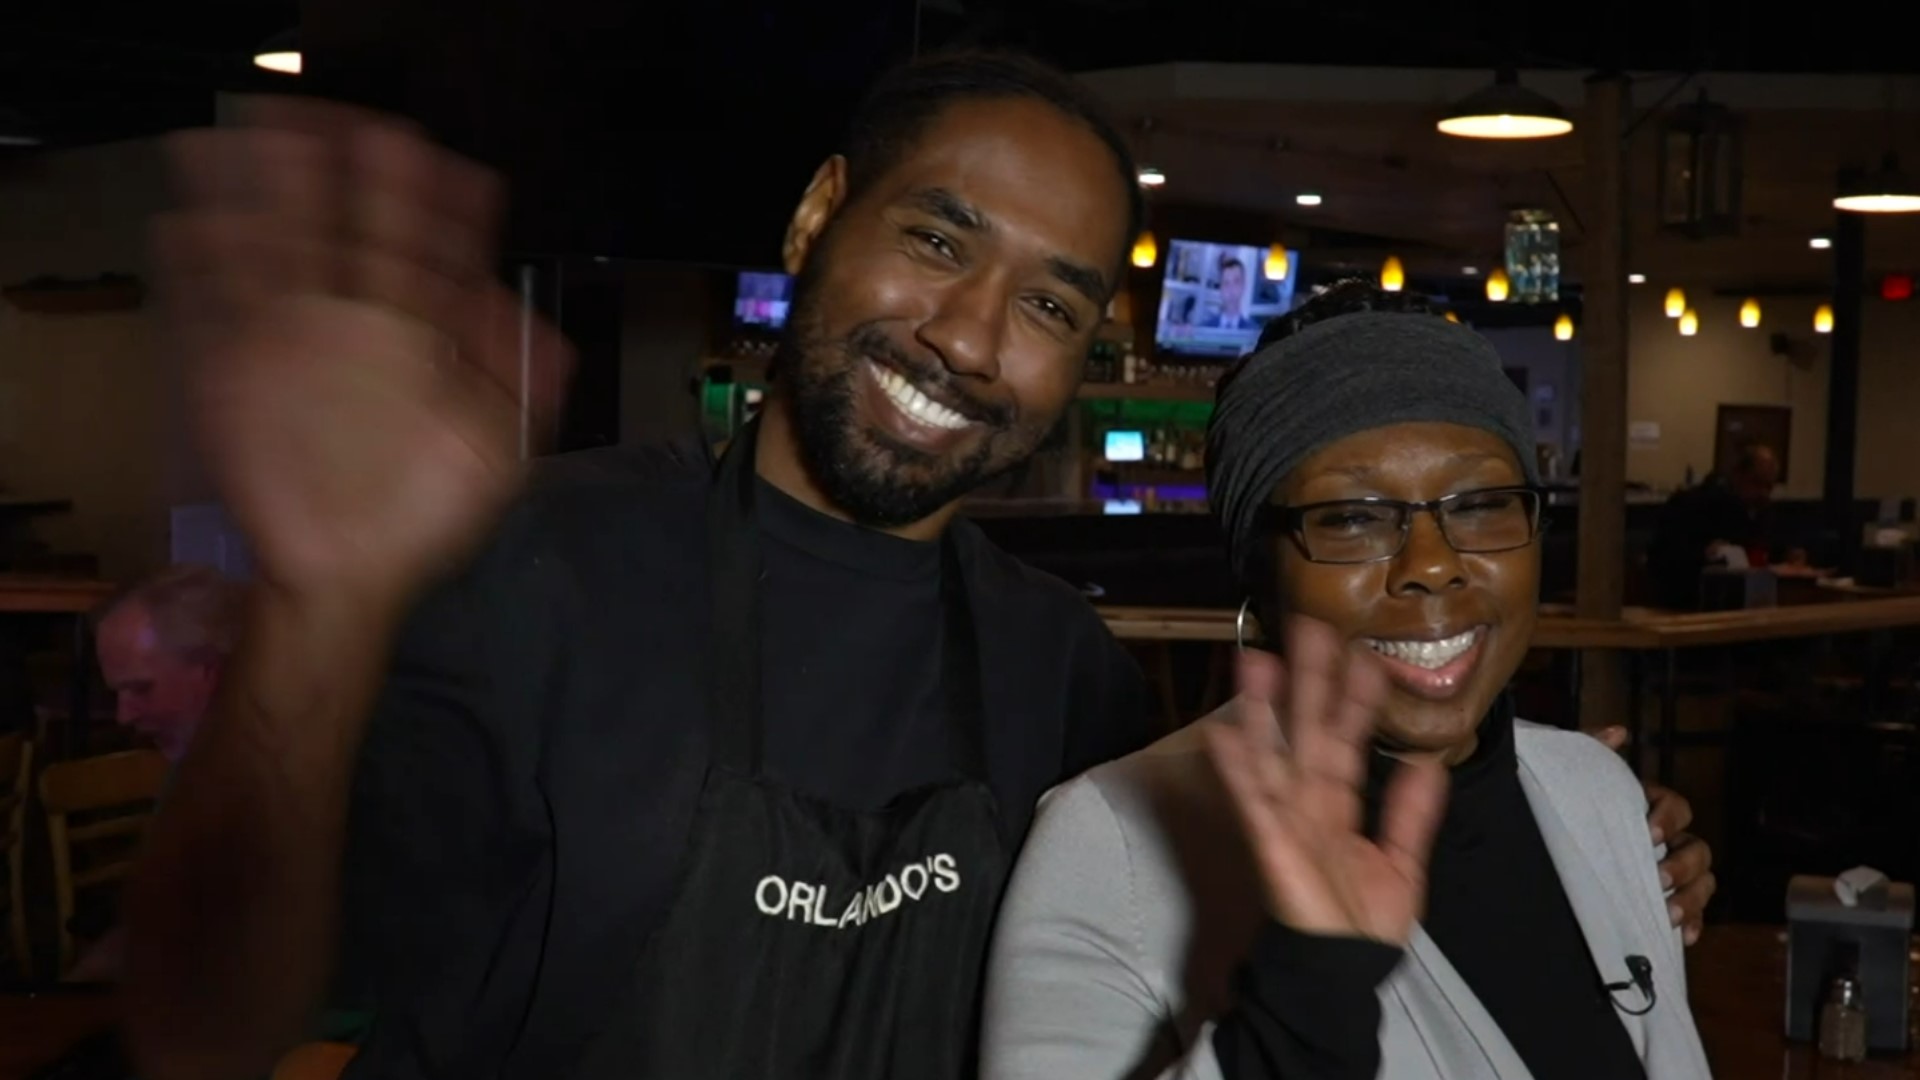 Orlando's Bar & Southern BBQ is all about family —theirs and yours. #k5evening